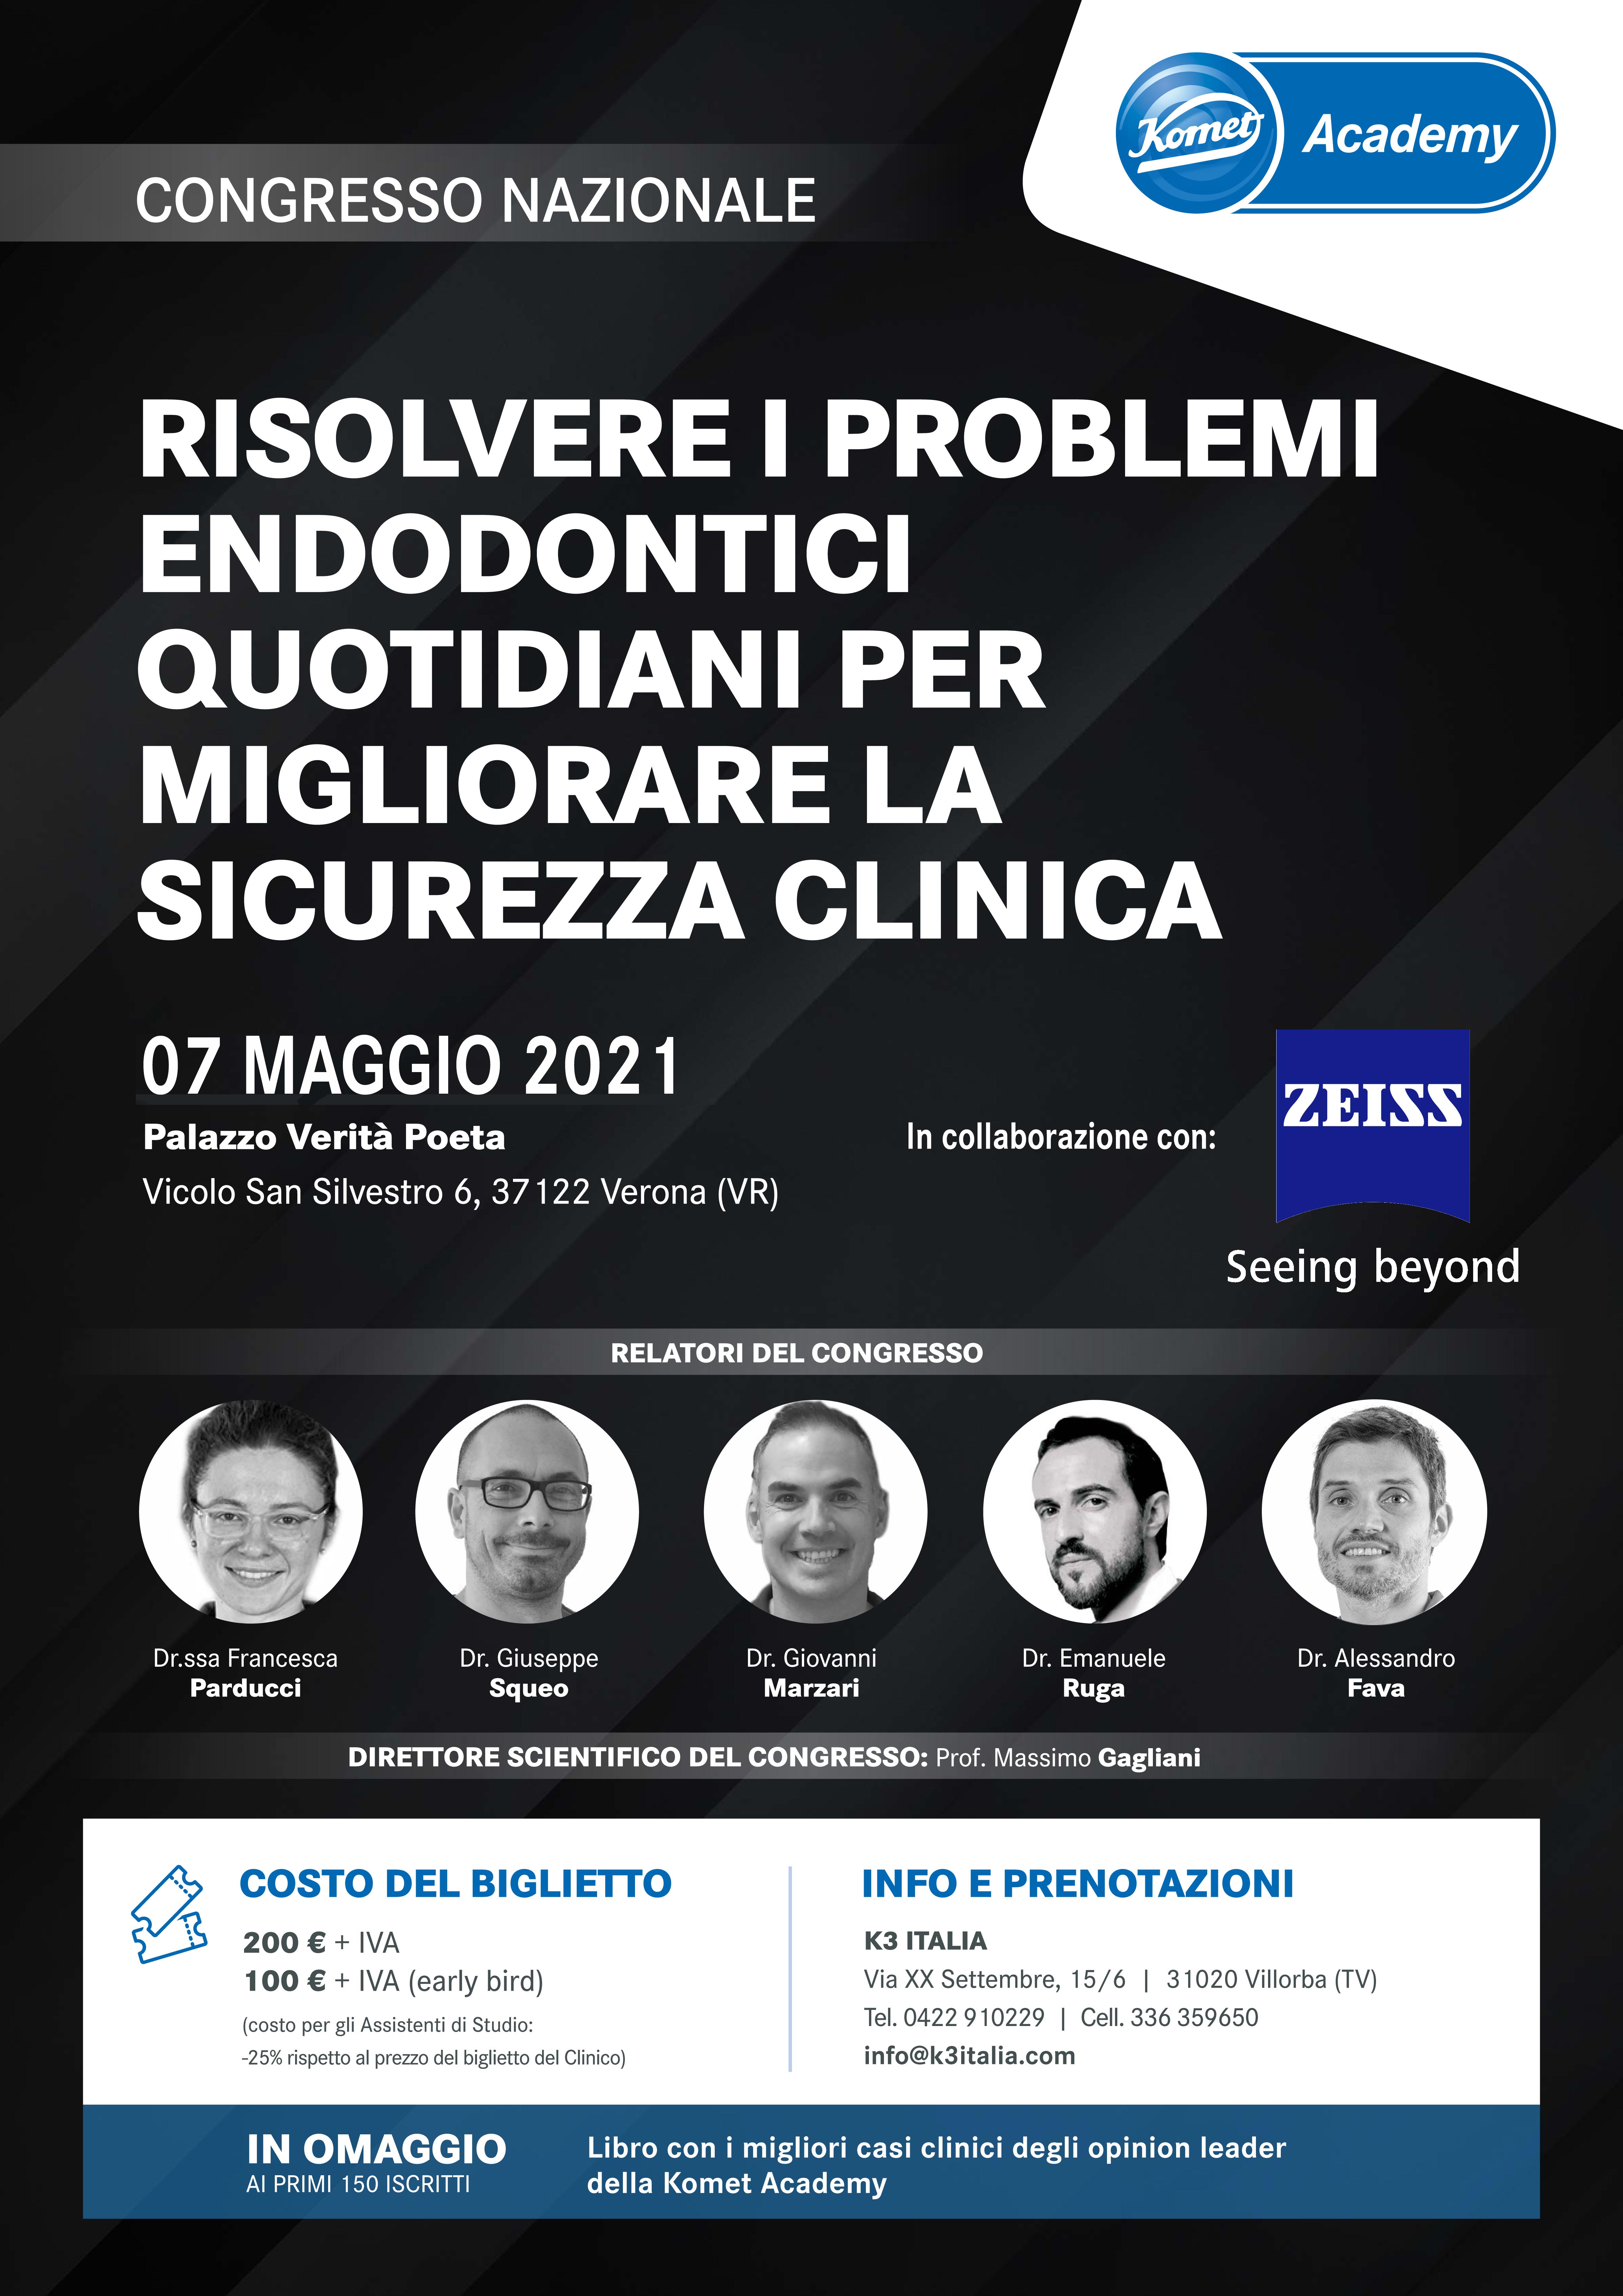 Congresso Endo_v2 Powered by Zeiss small 7 maggio 2021